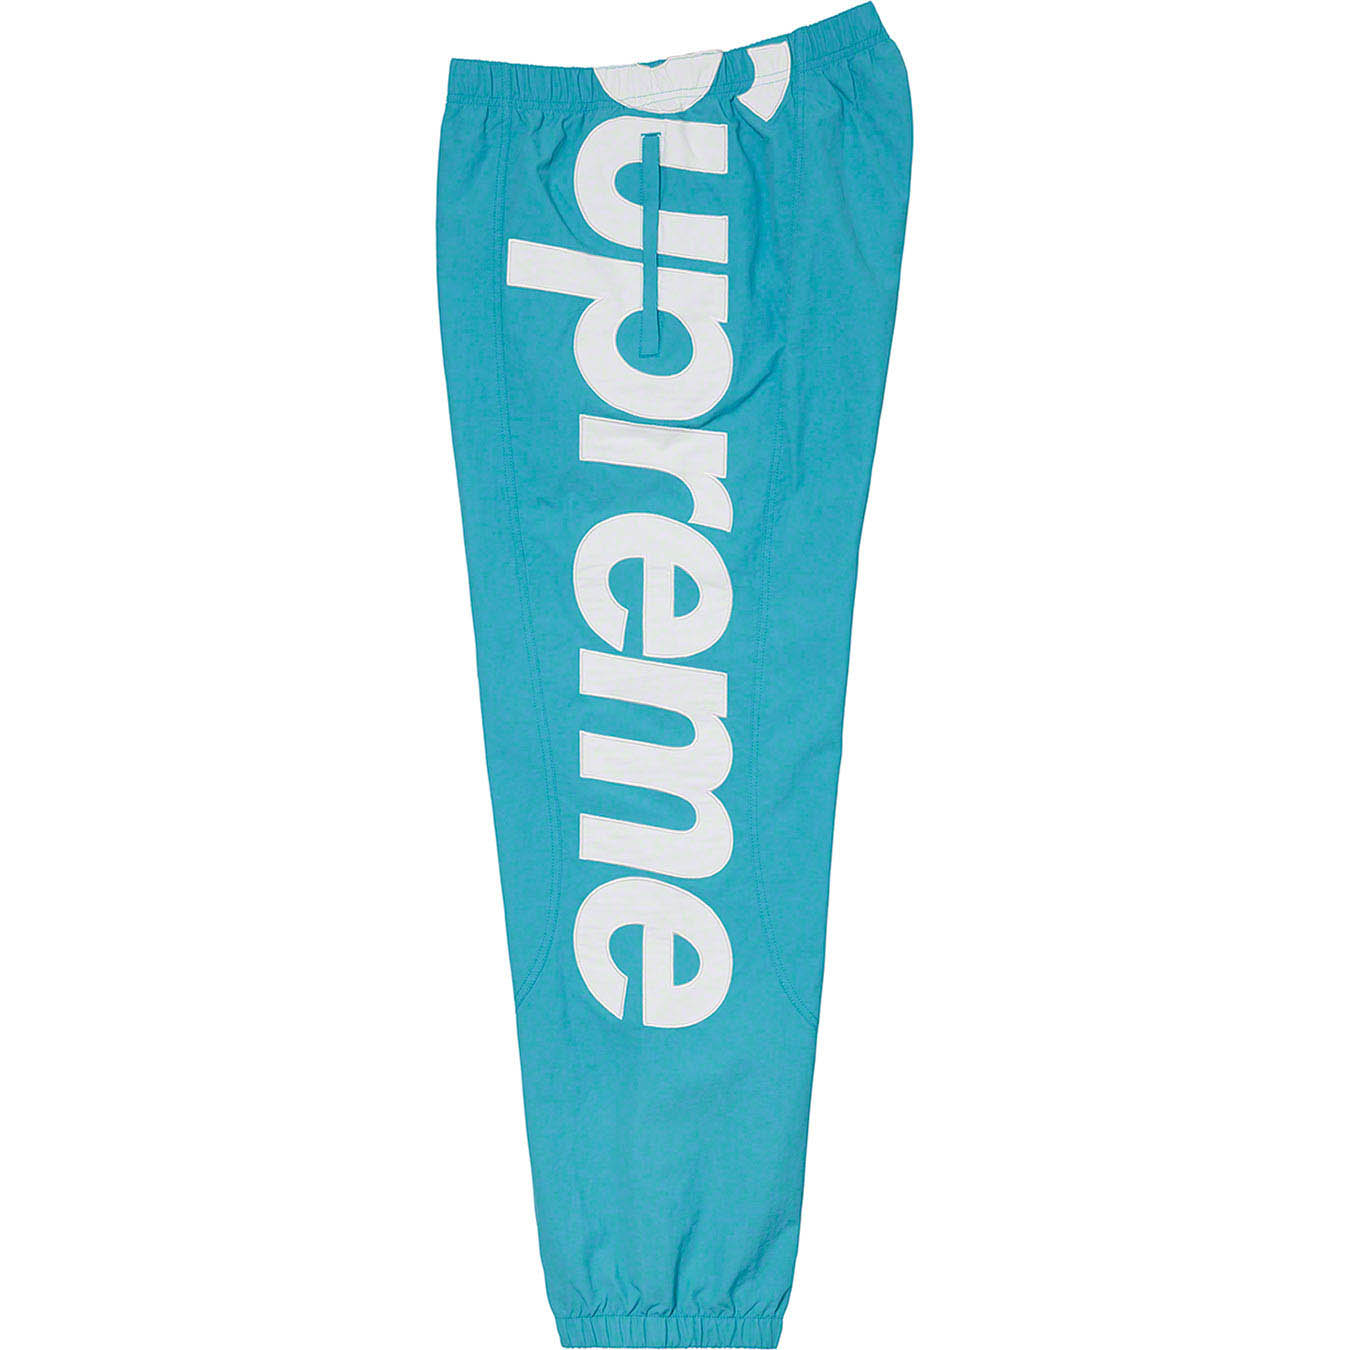 Supreme Spellout Track Pant